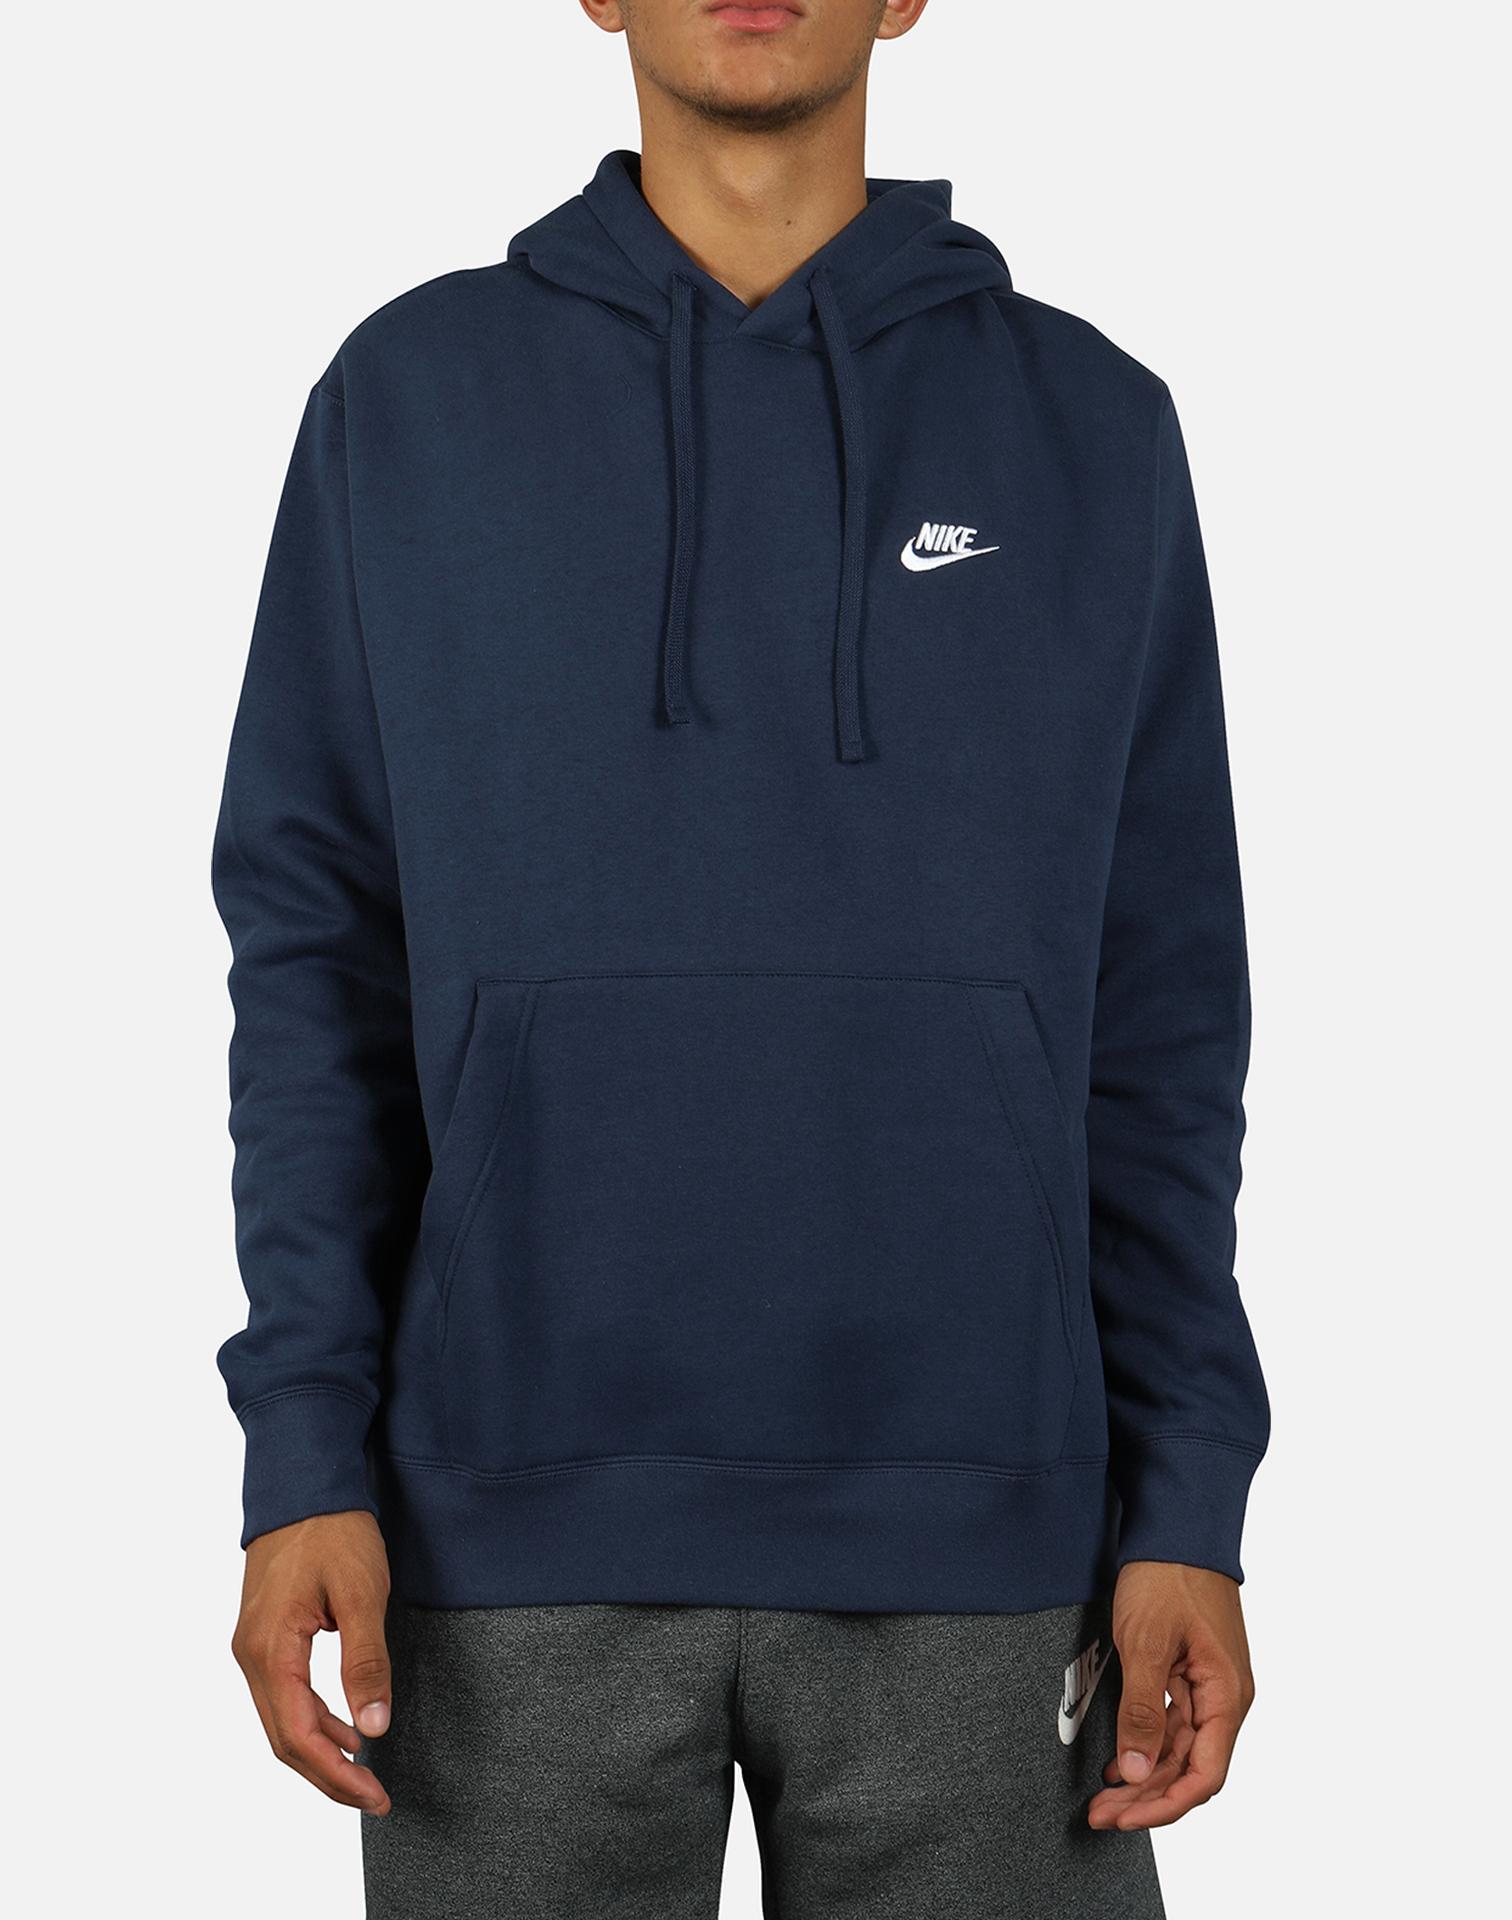 nike pullover sweatshirt hoodie plain with only nike sign